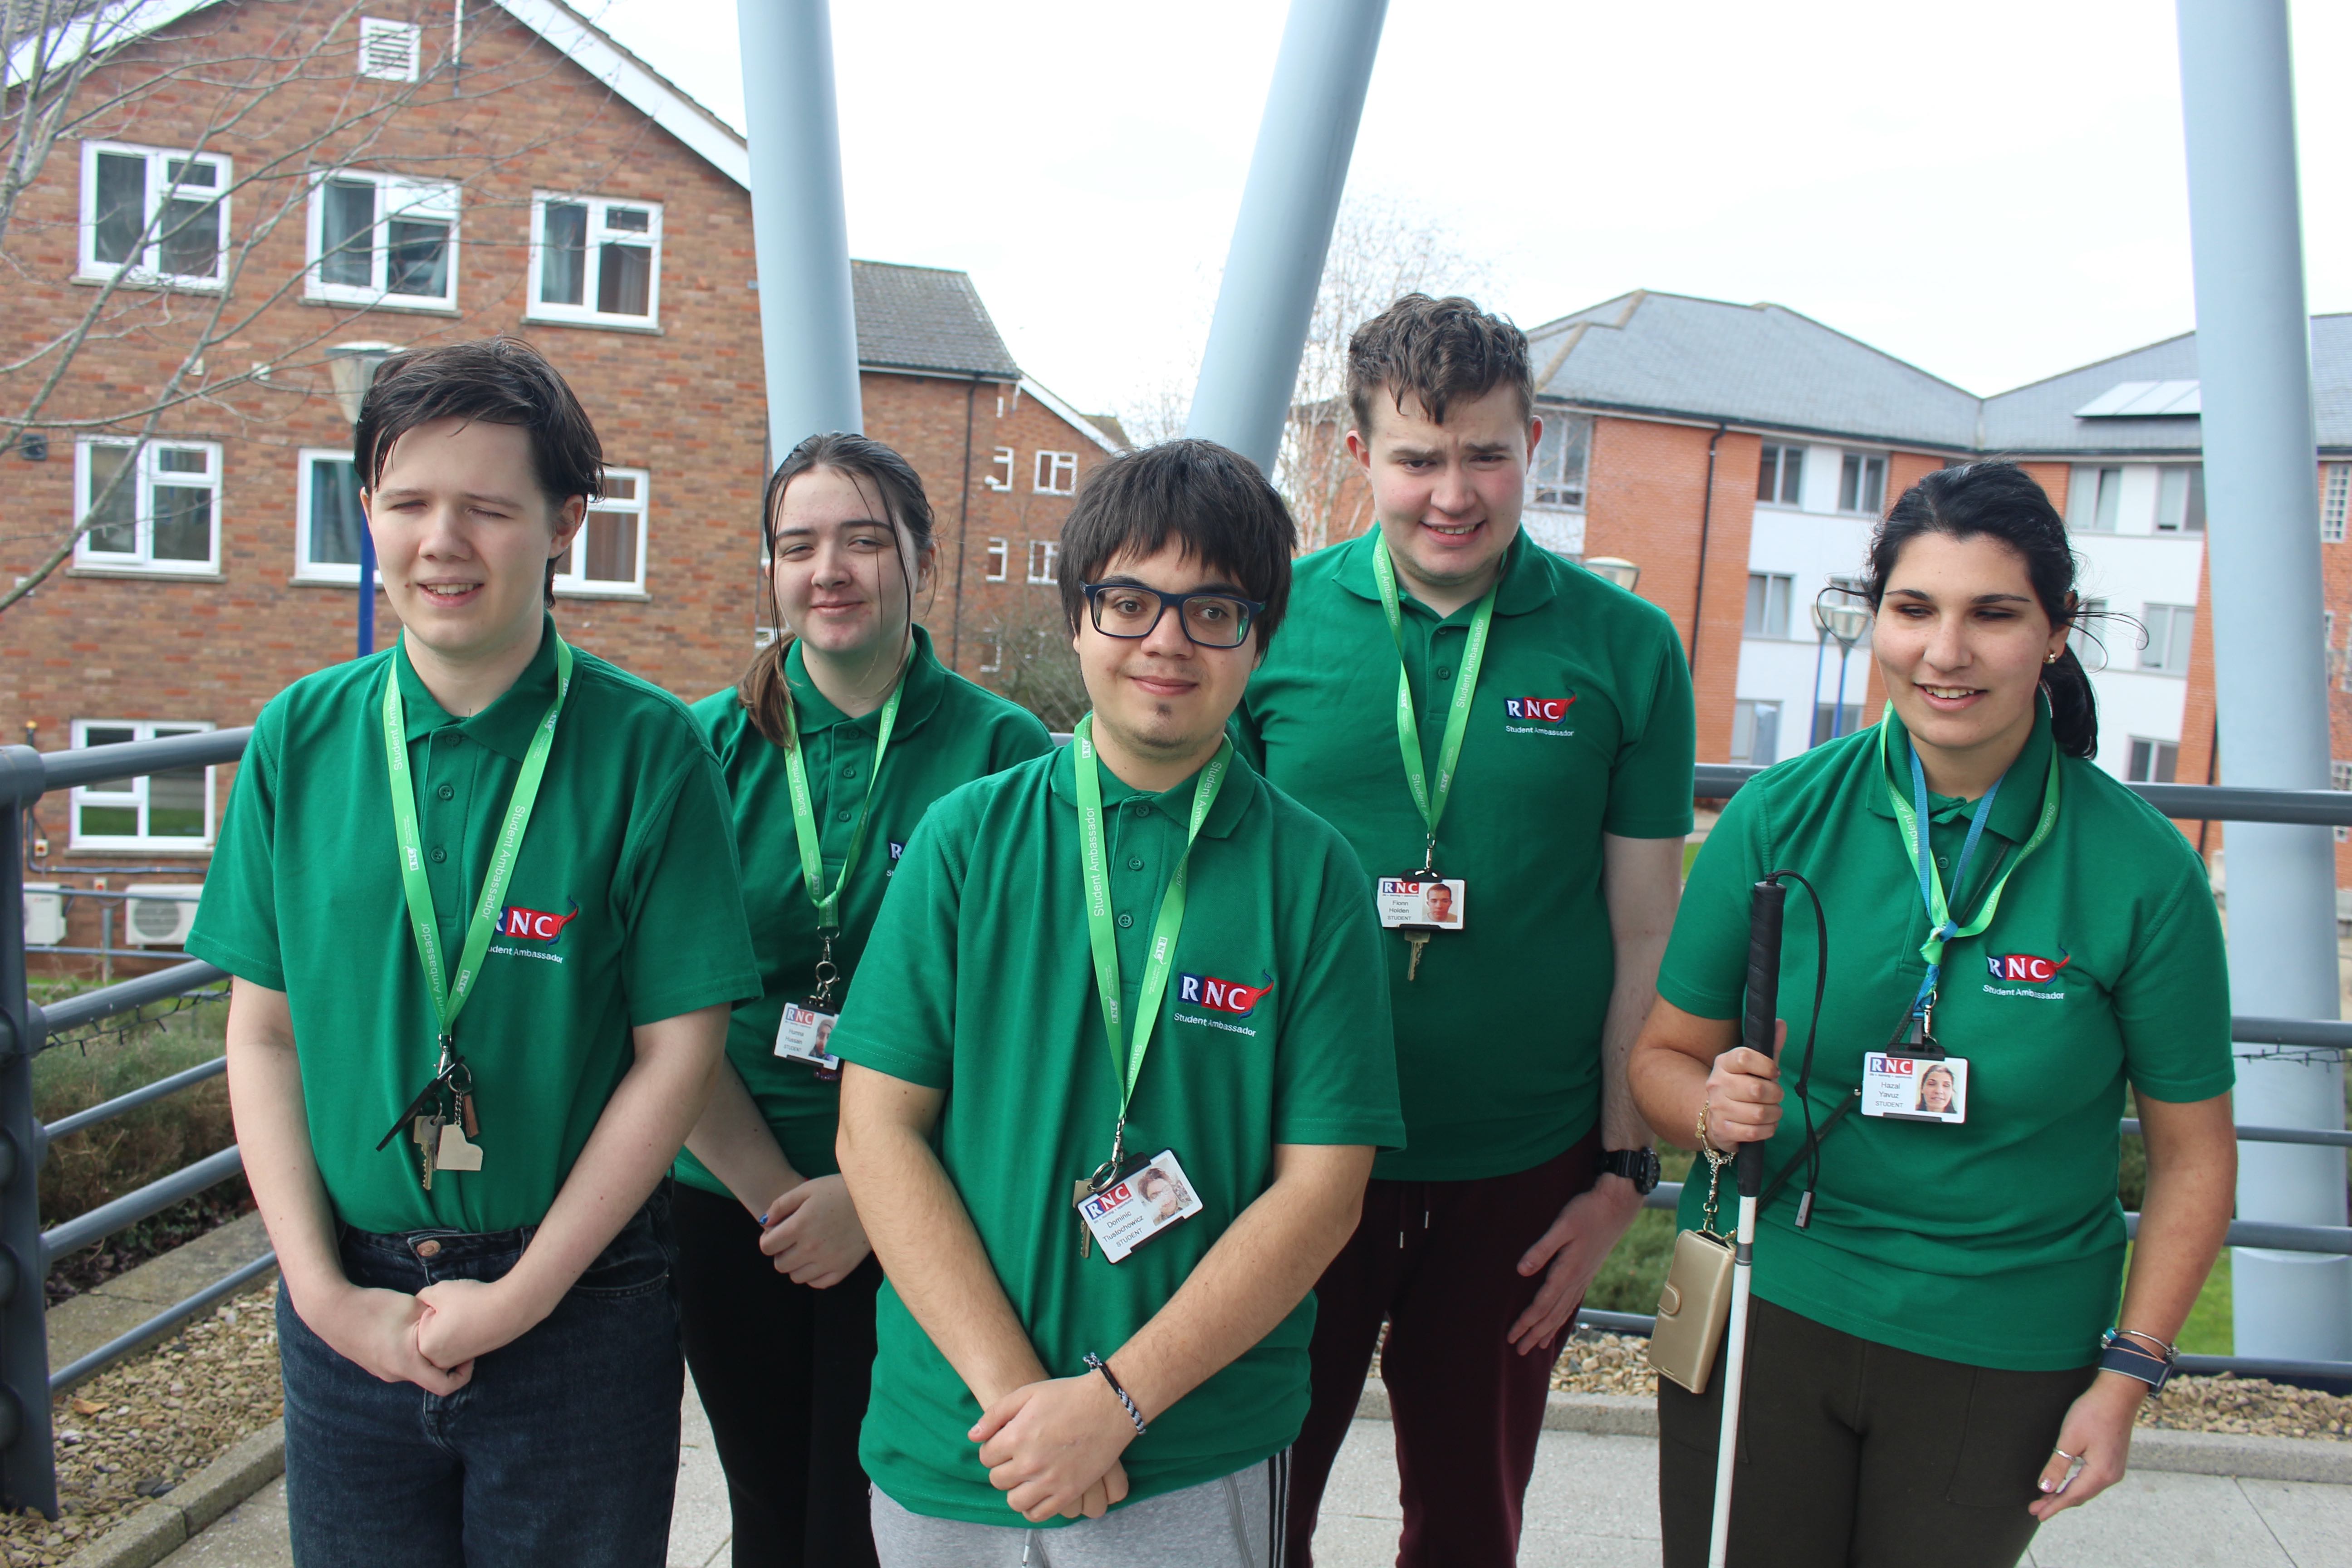 The group of five student ambassadors dressed in their green ambassador polo shirts and lanyards